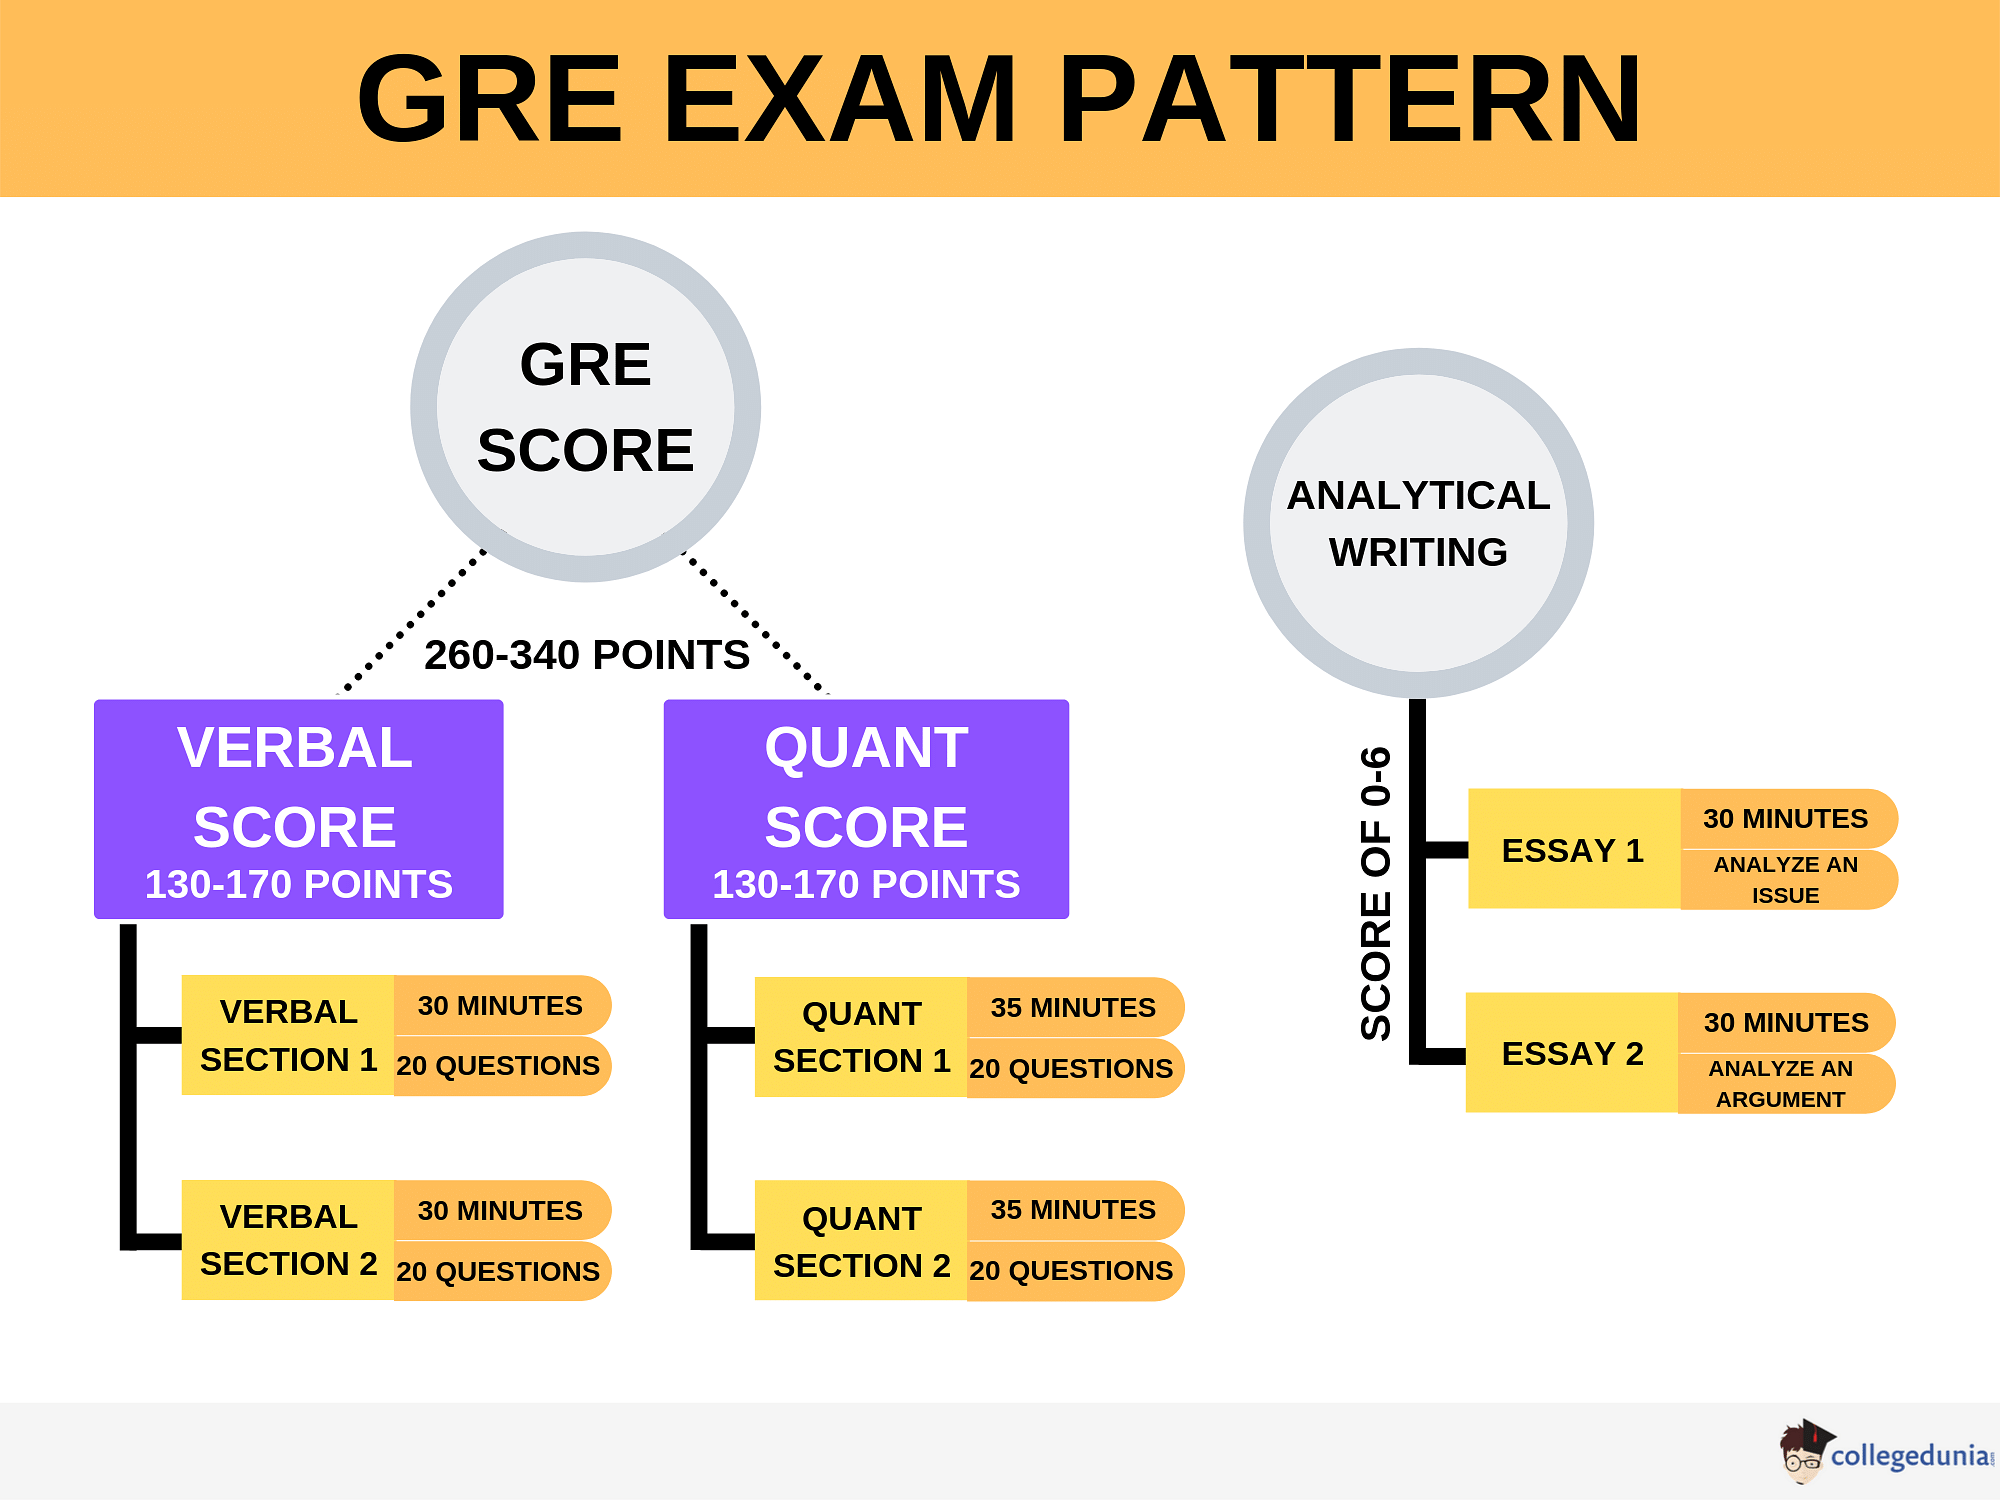 GRE 2020 Exam Pattern and Syllabus for GRE General & GRE Subject tests